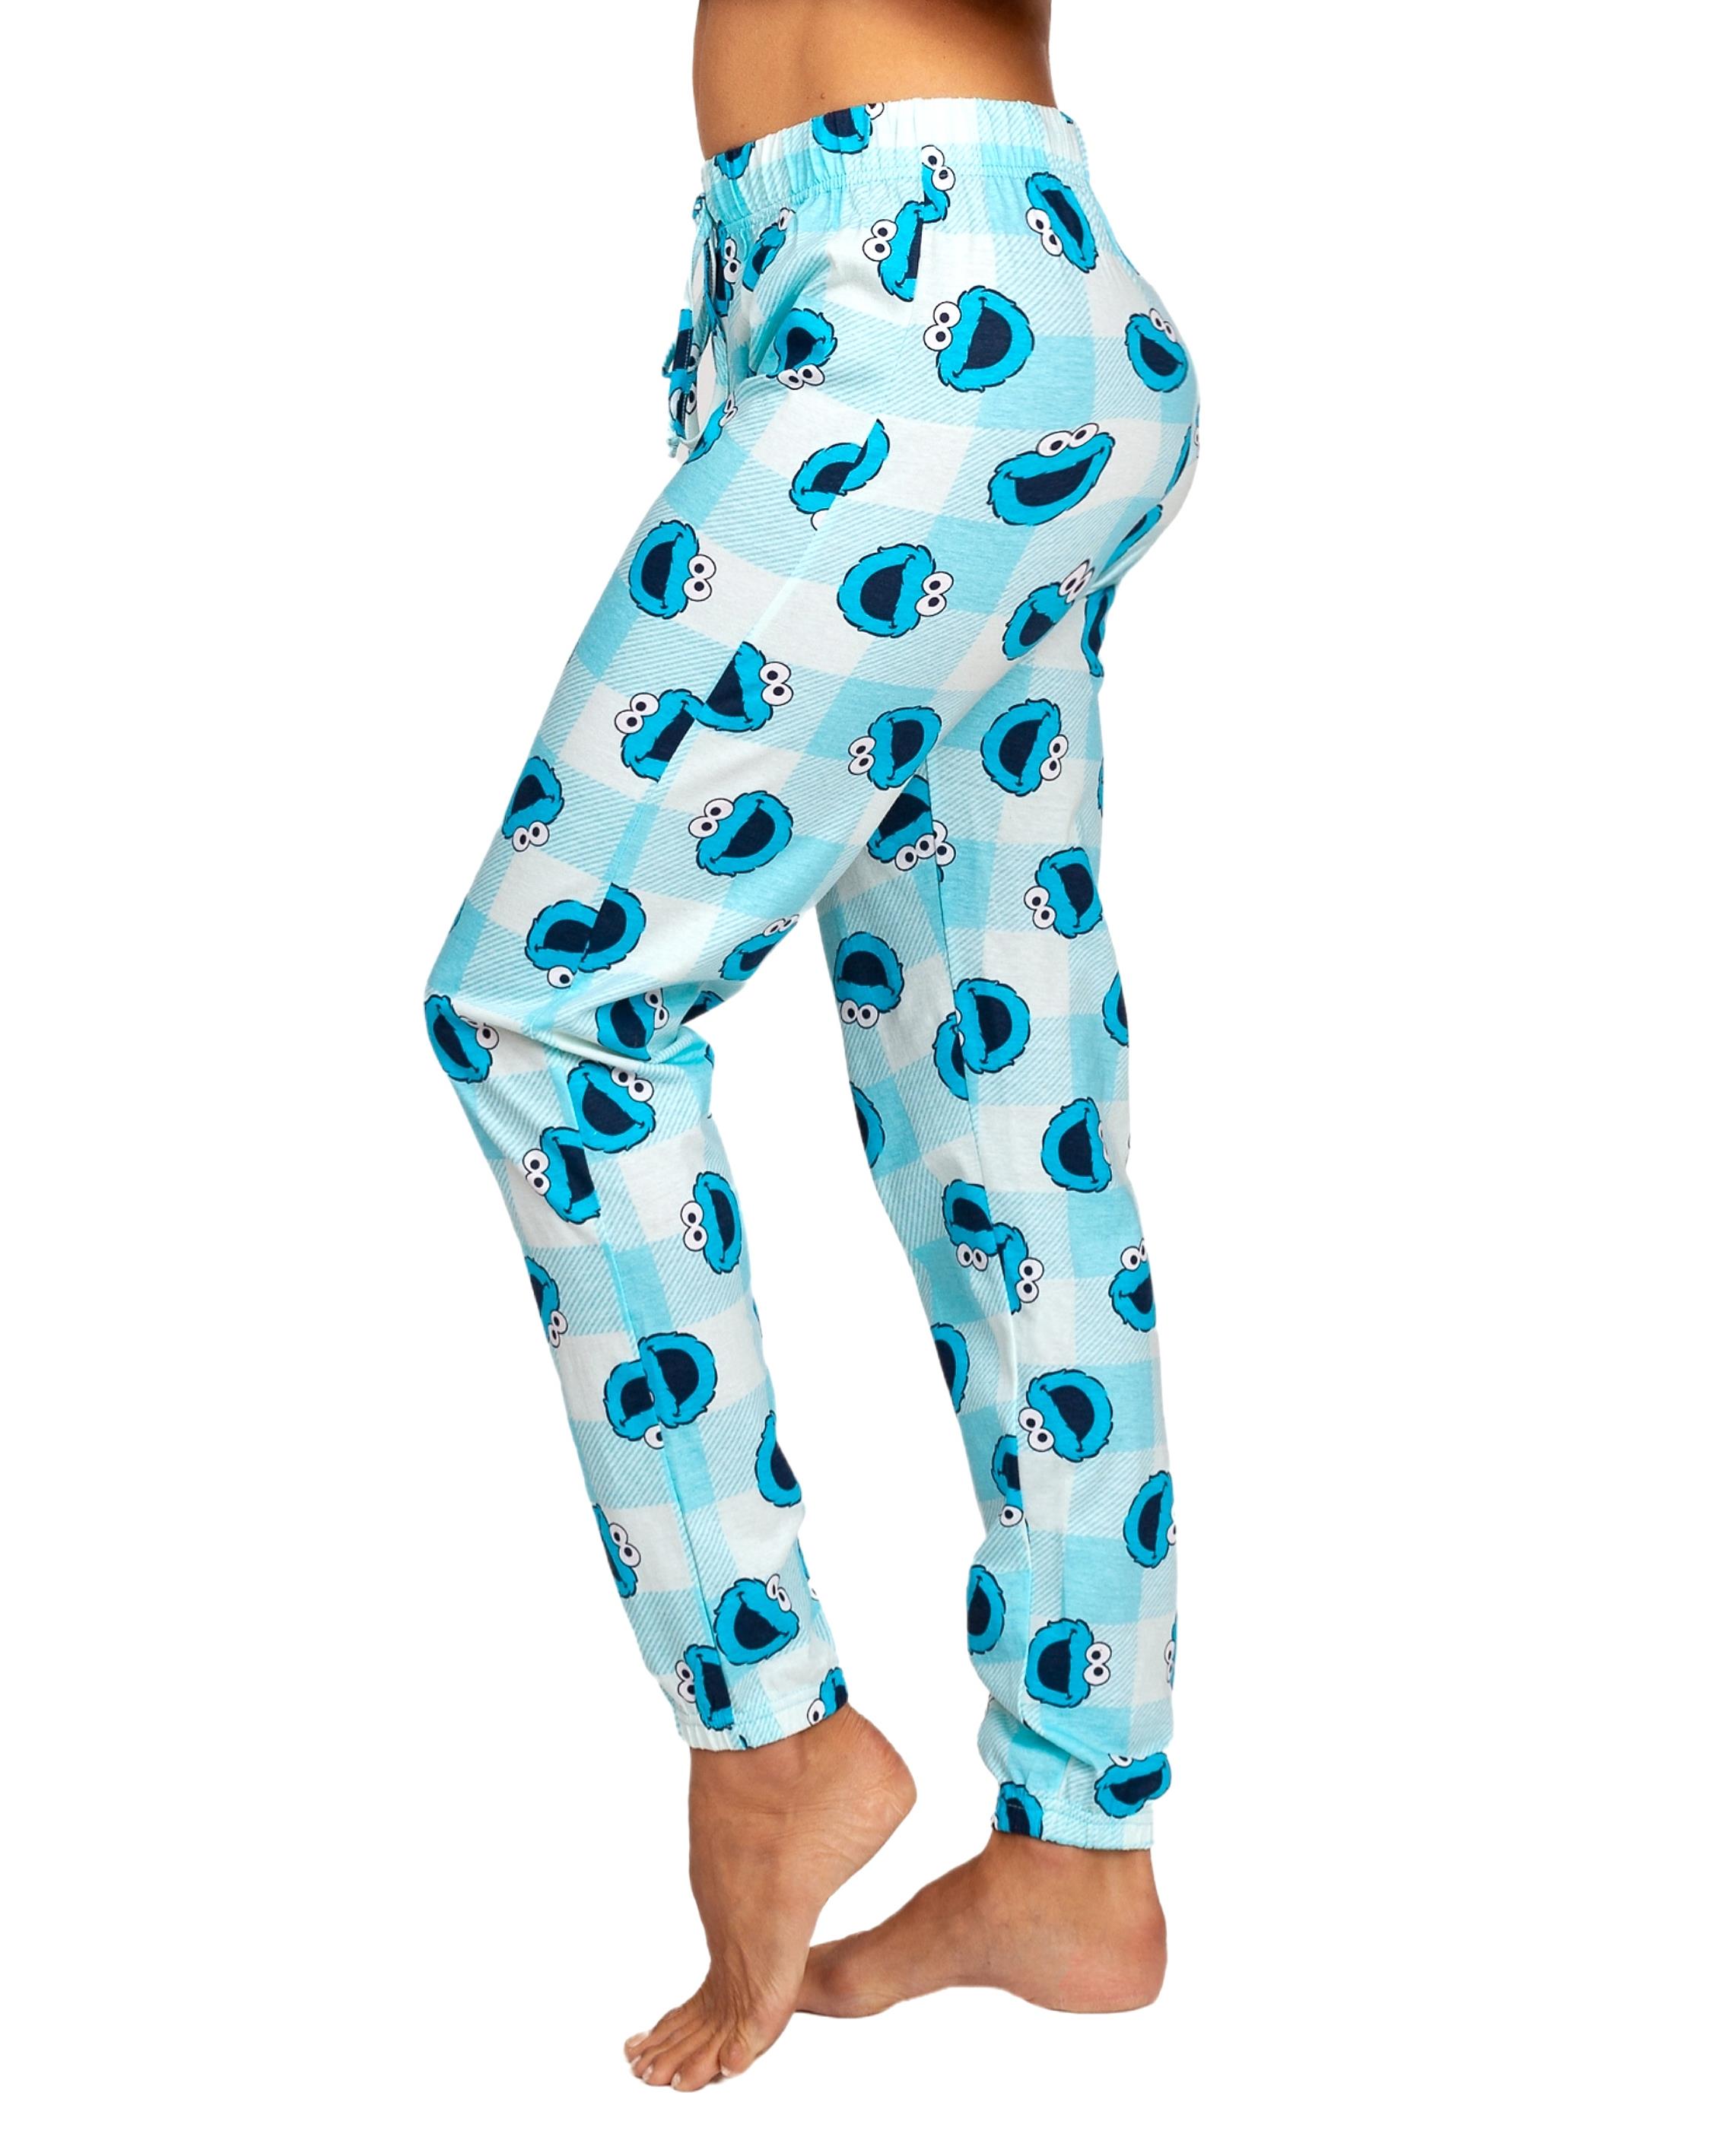 Sesame Street Cookie Monster Womens Pajama Pants Lounge Jogger, Cookie Monster, Size: L - image 3 of 3